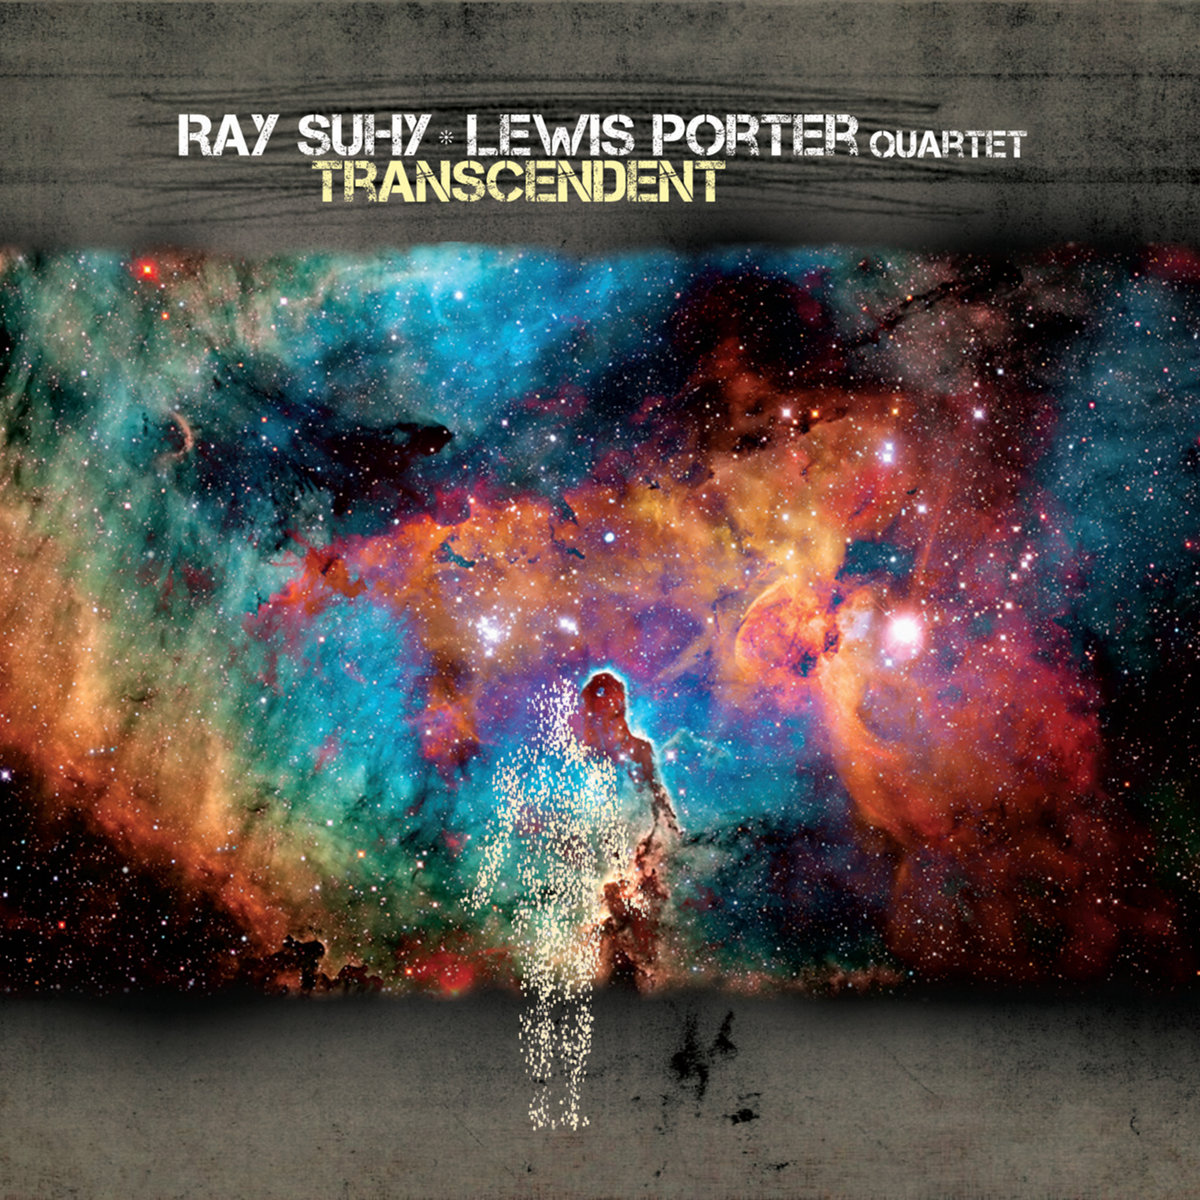 Ray Suhy and Lewis Porter Quartet – Transcendent (2020) [FLAC 24bit/48kHz]